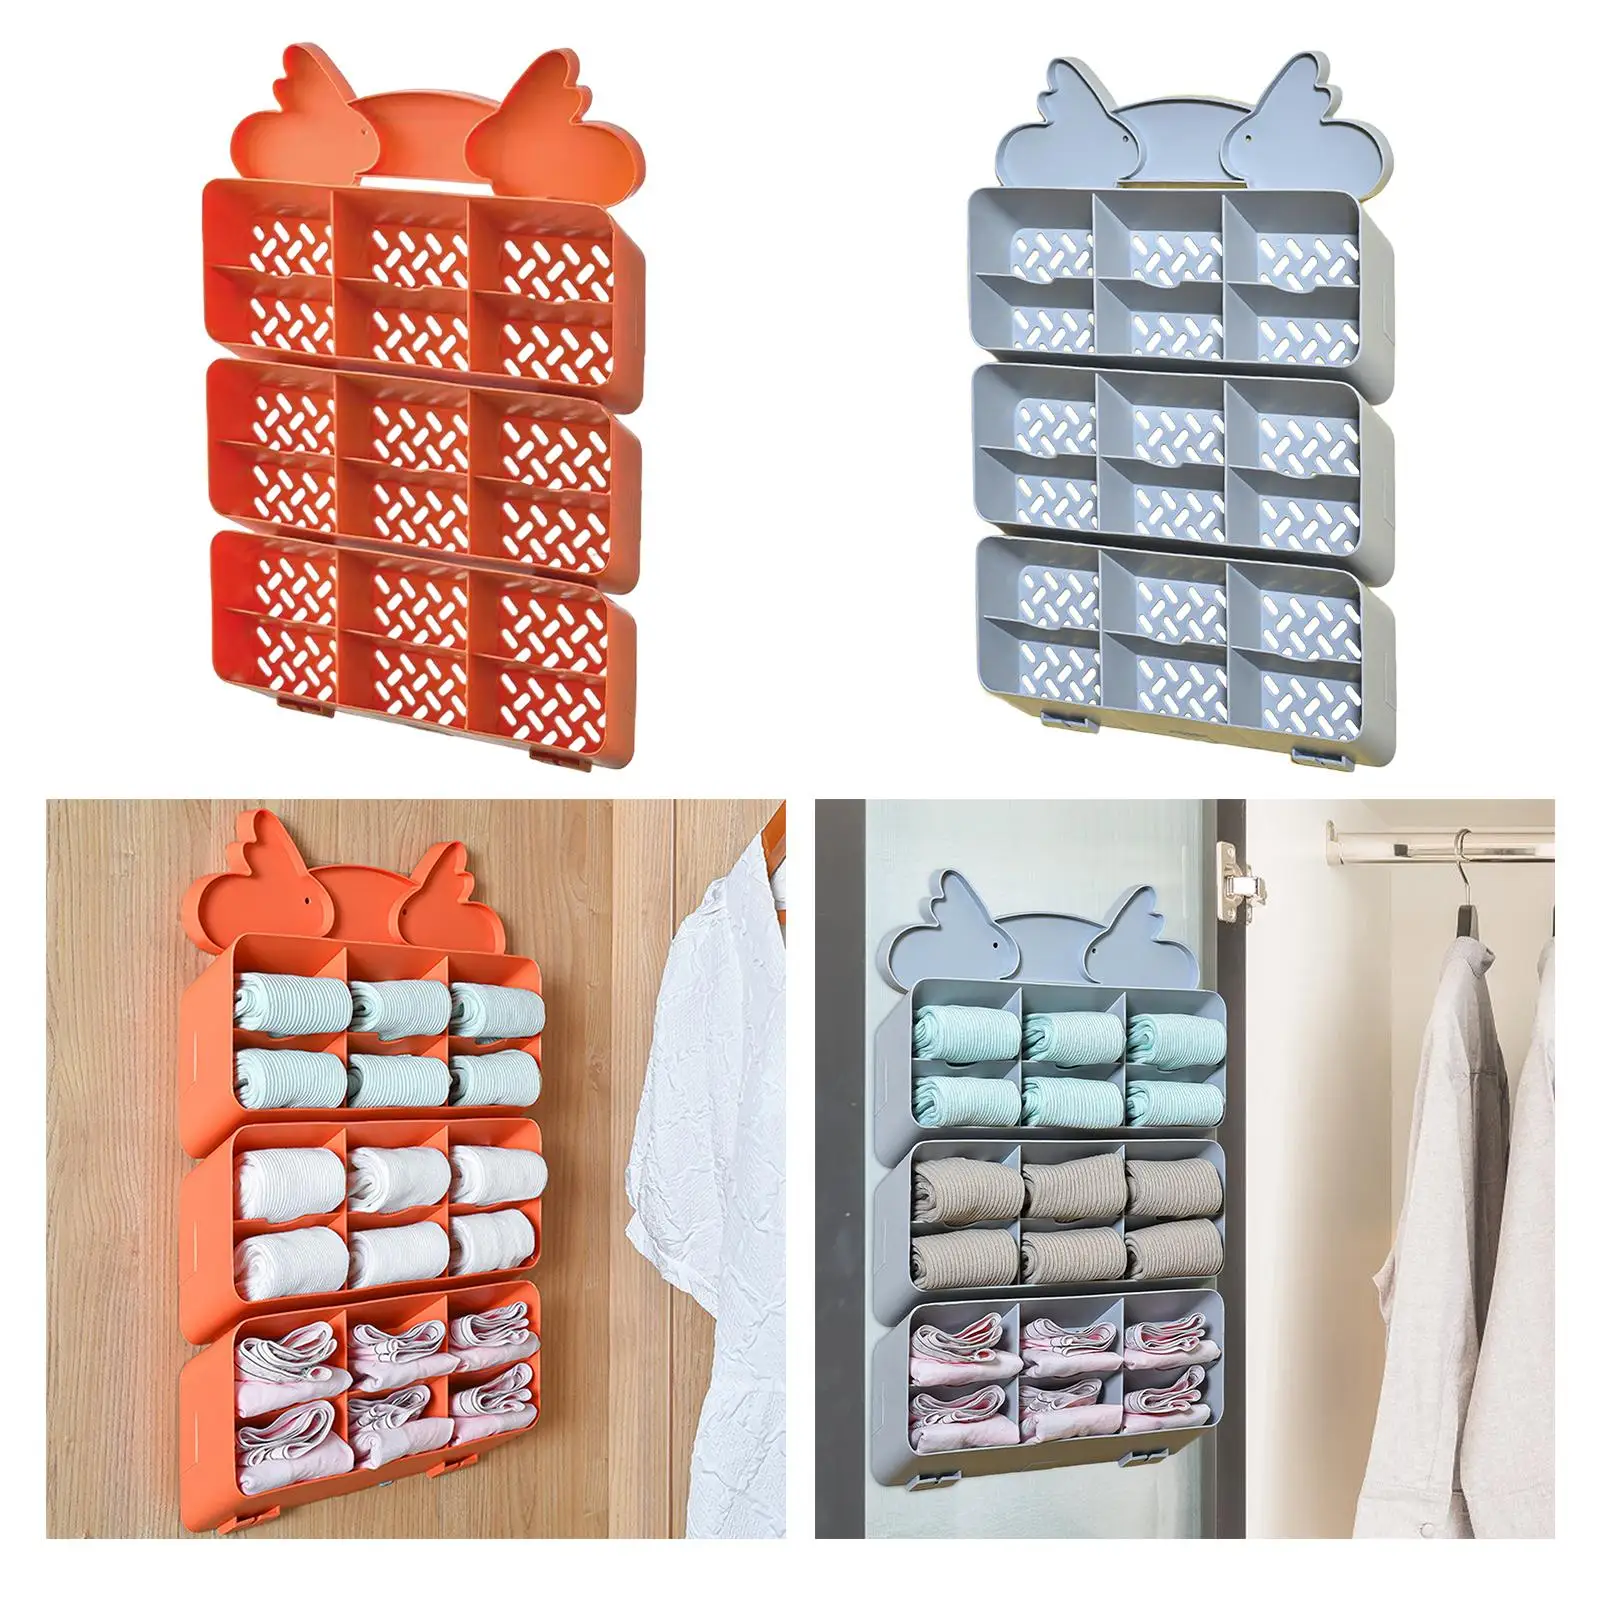 Socks Underwear Storage Hanging Stackable Separated 18 Compartments Divider Wall Shelves for Home Closet Bathroom Dorm Apartment